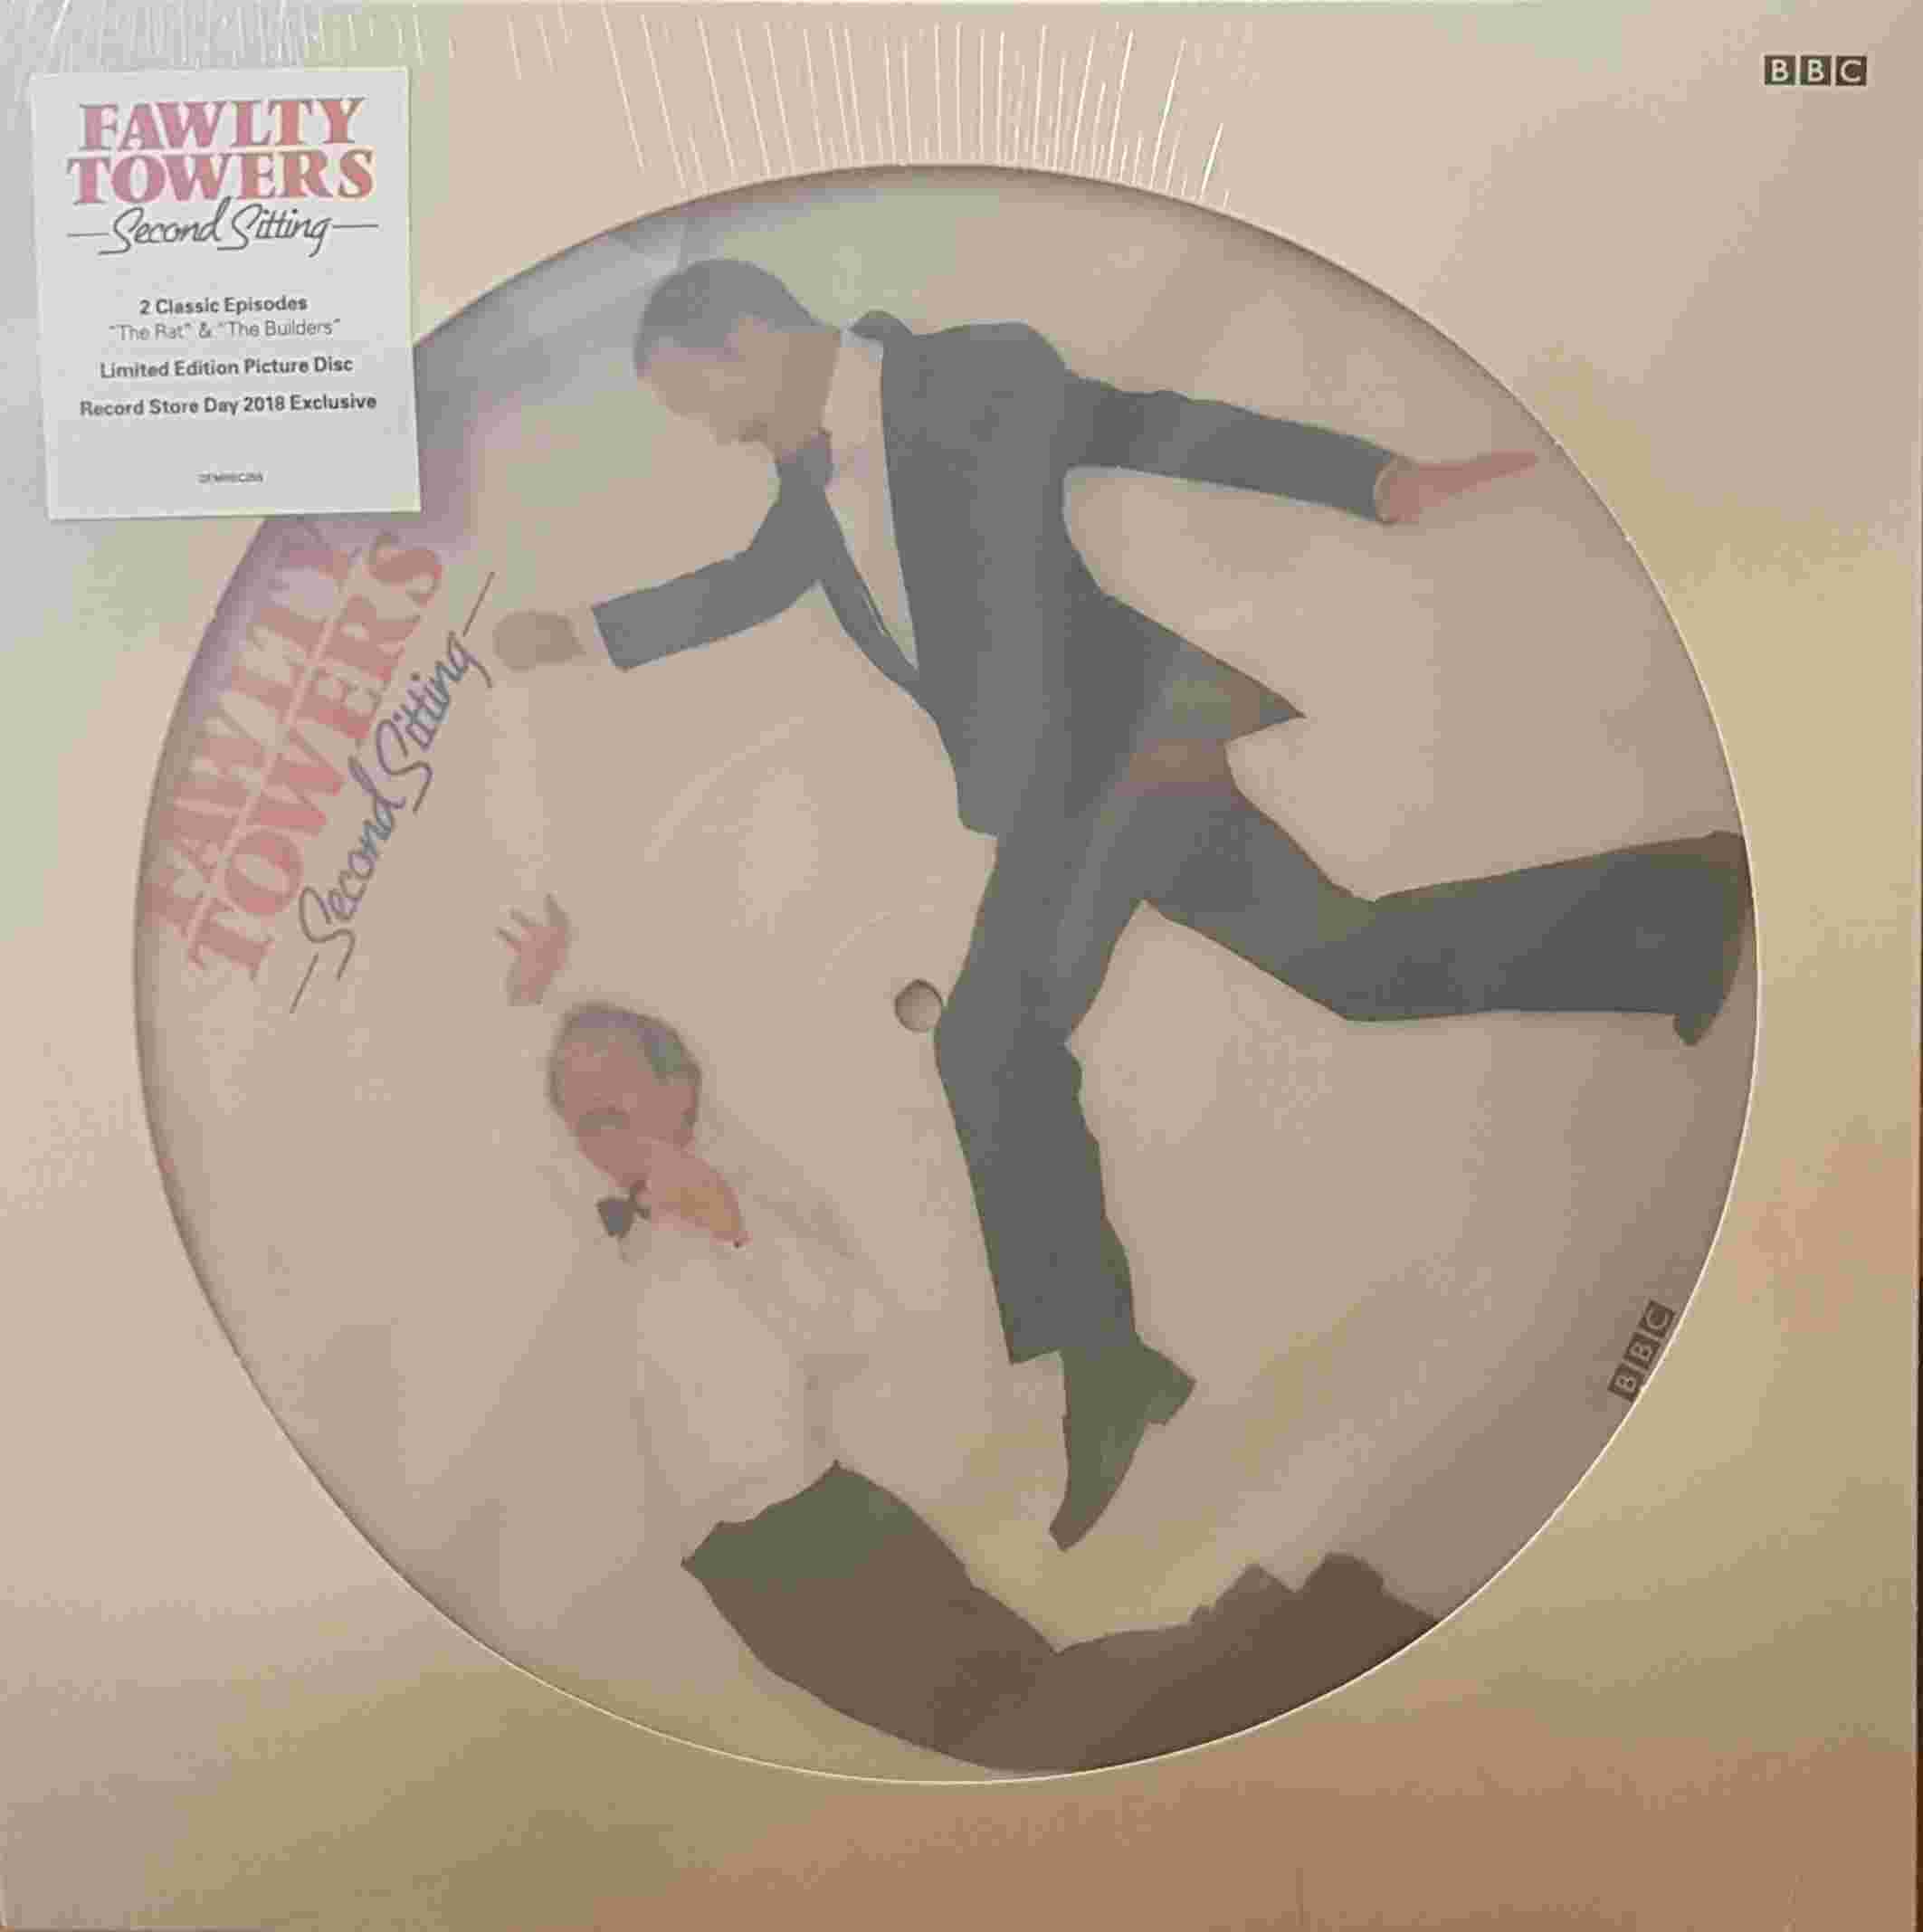 Picture of DEMREC 255 Fawlty Towers - Second sitting - Record Store Day 2018 by artist John Cleese / Connie Booth from the BBC records and Tapes library